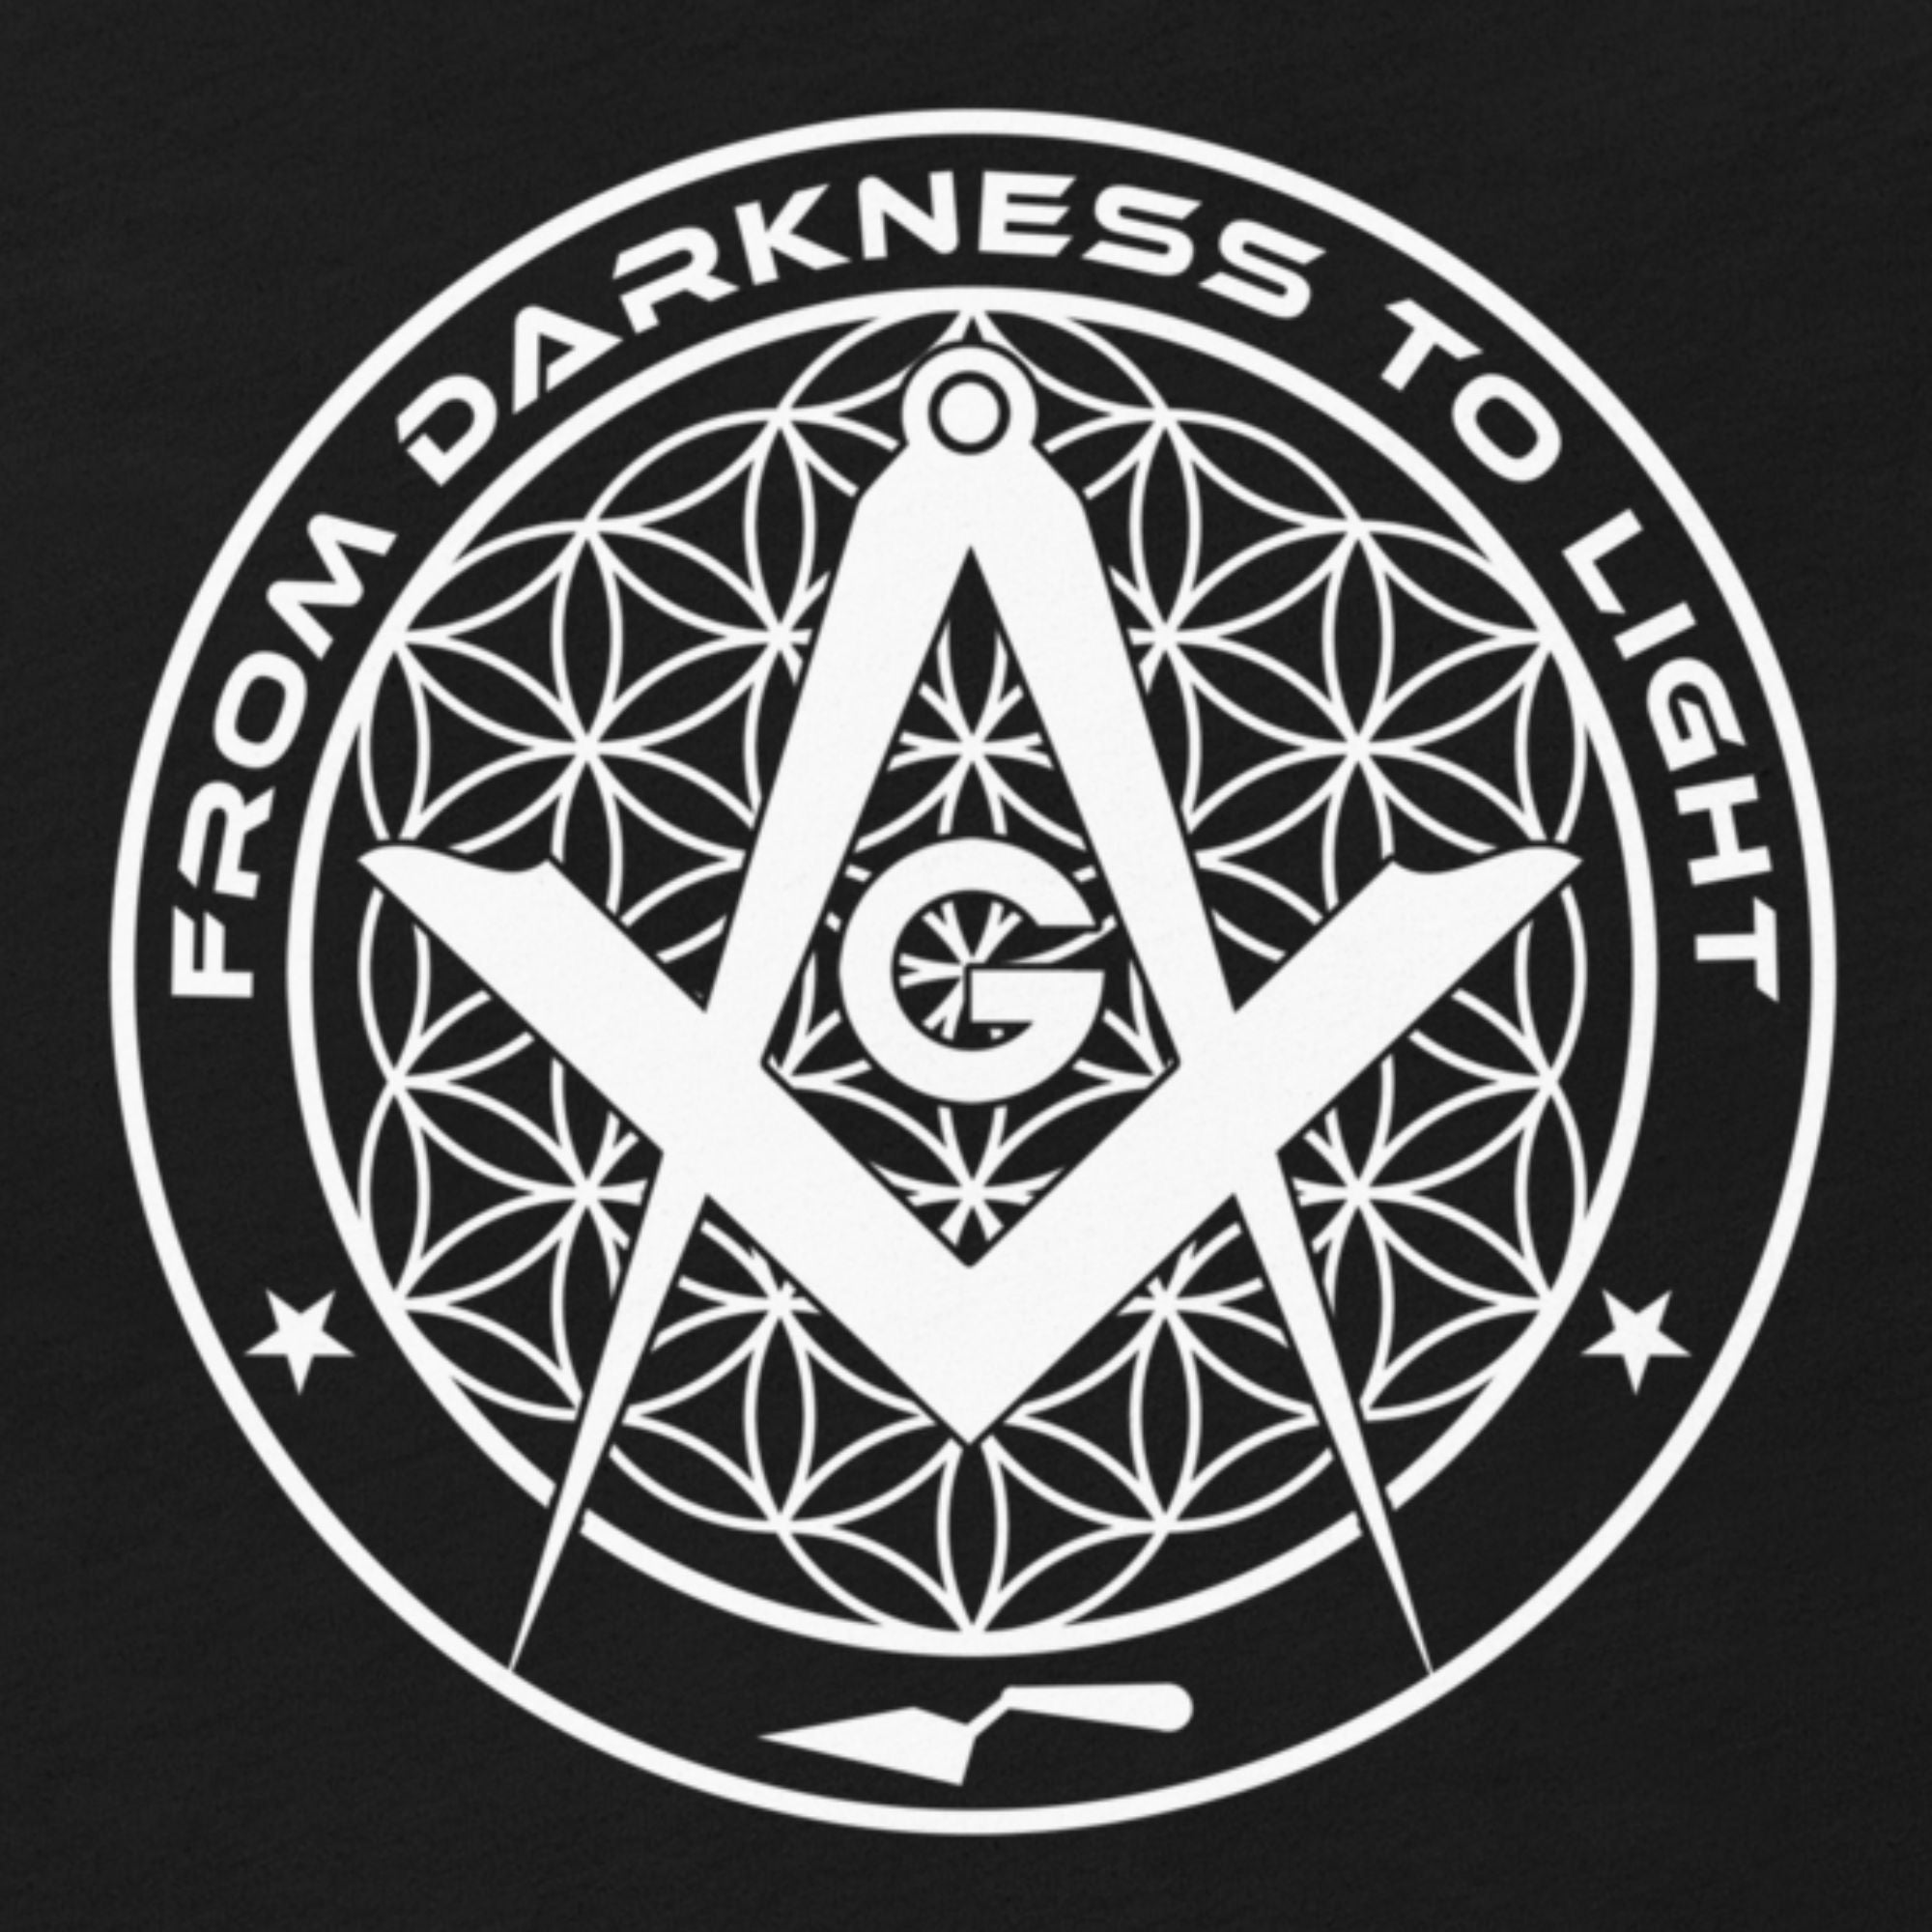 From Darkness to Light T-Shirt